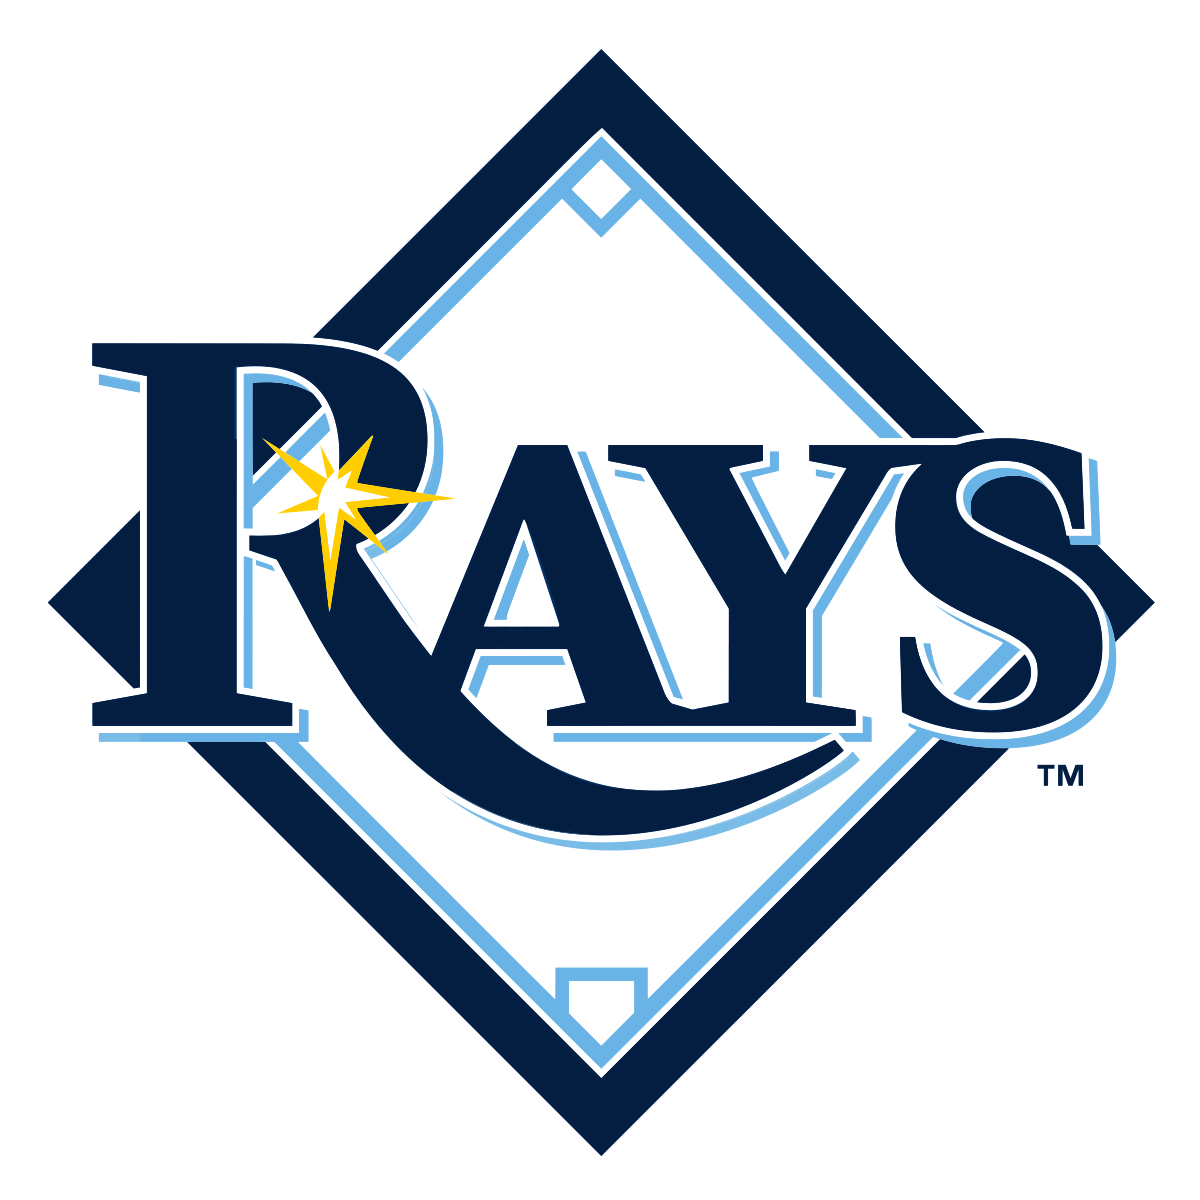 Tampa Bay Rays Backgrounds, Compatible - PC, Mobile, Gadgets| 1200x1200 px